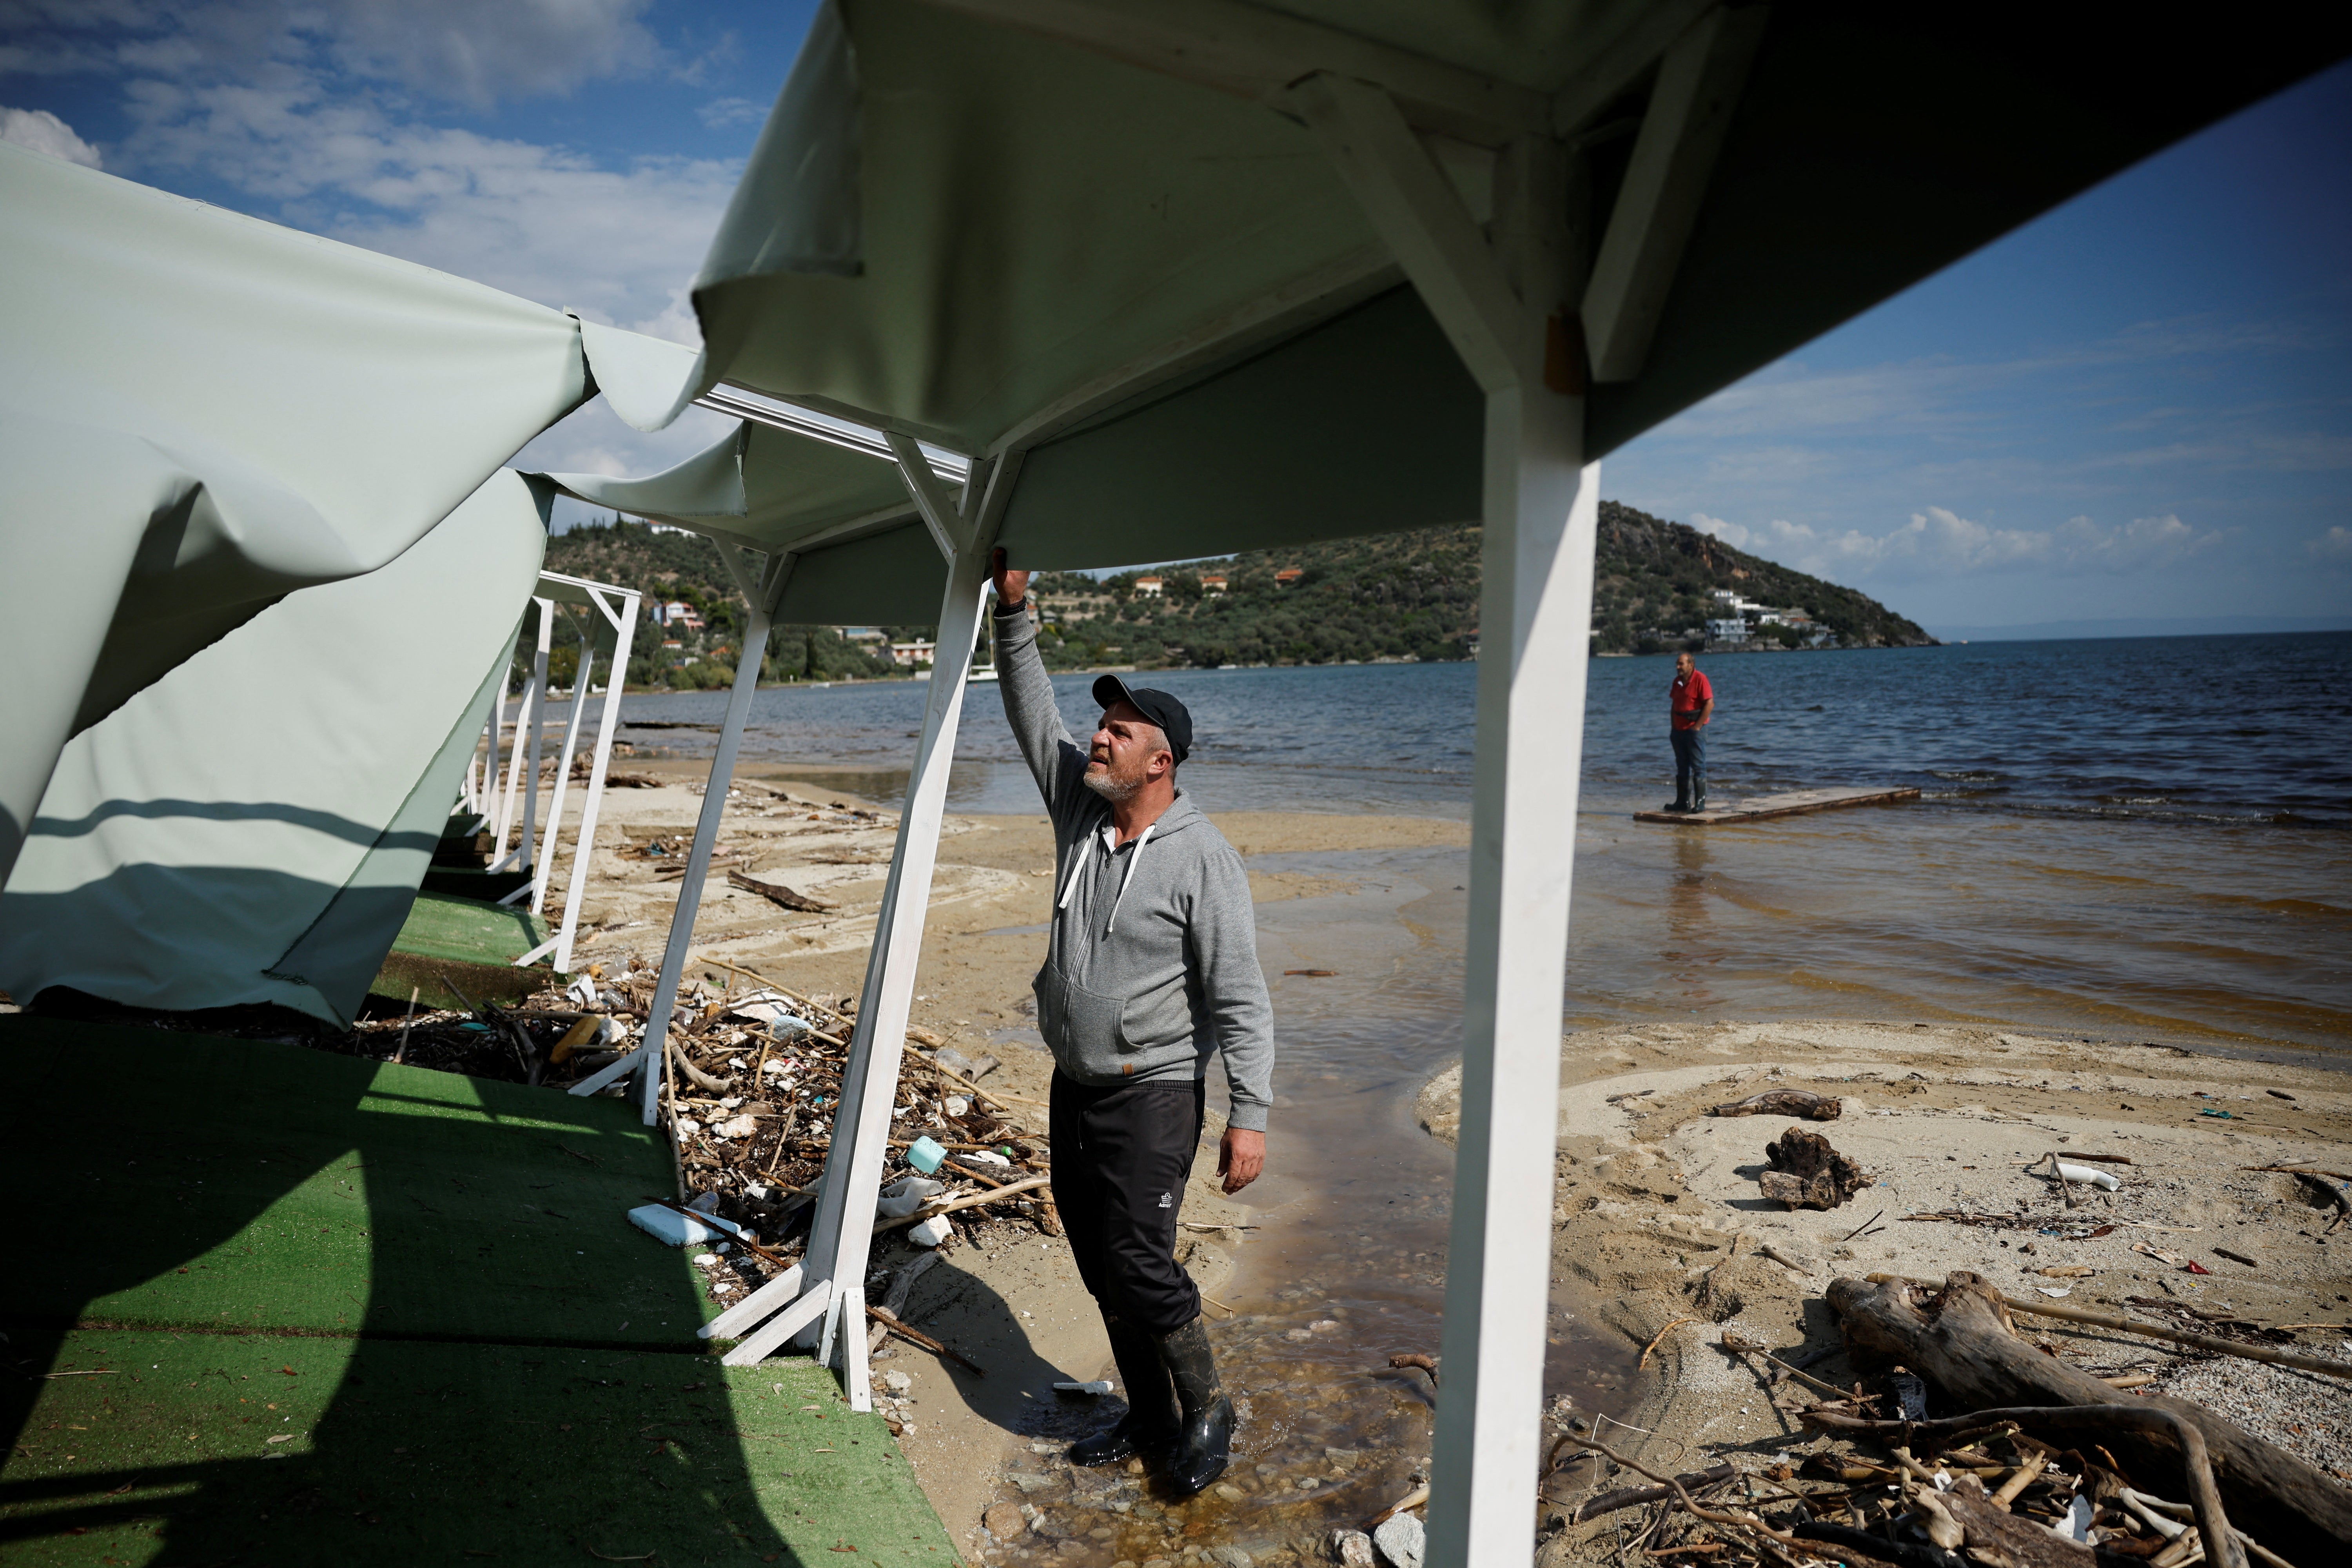 Tsiamitas inspects the damage at his beach bar in Chrissi Akti, also known as Golden Beach